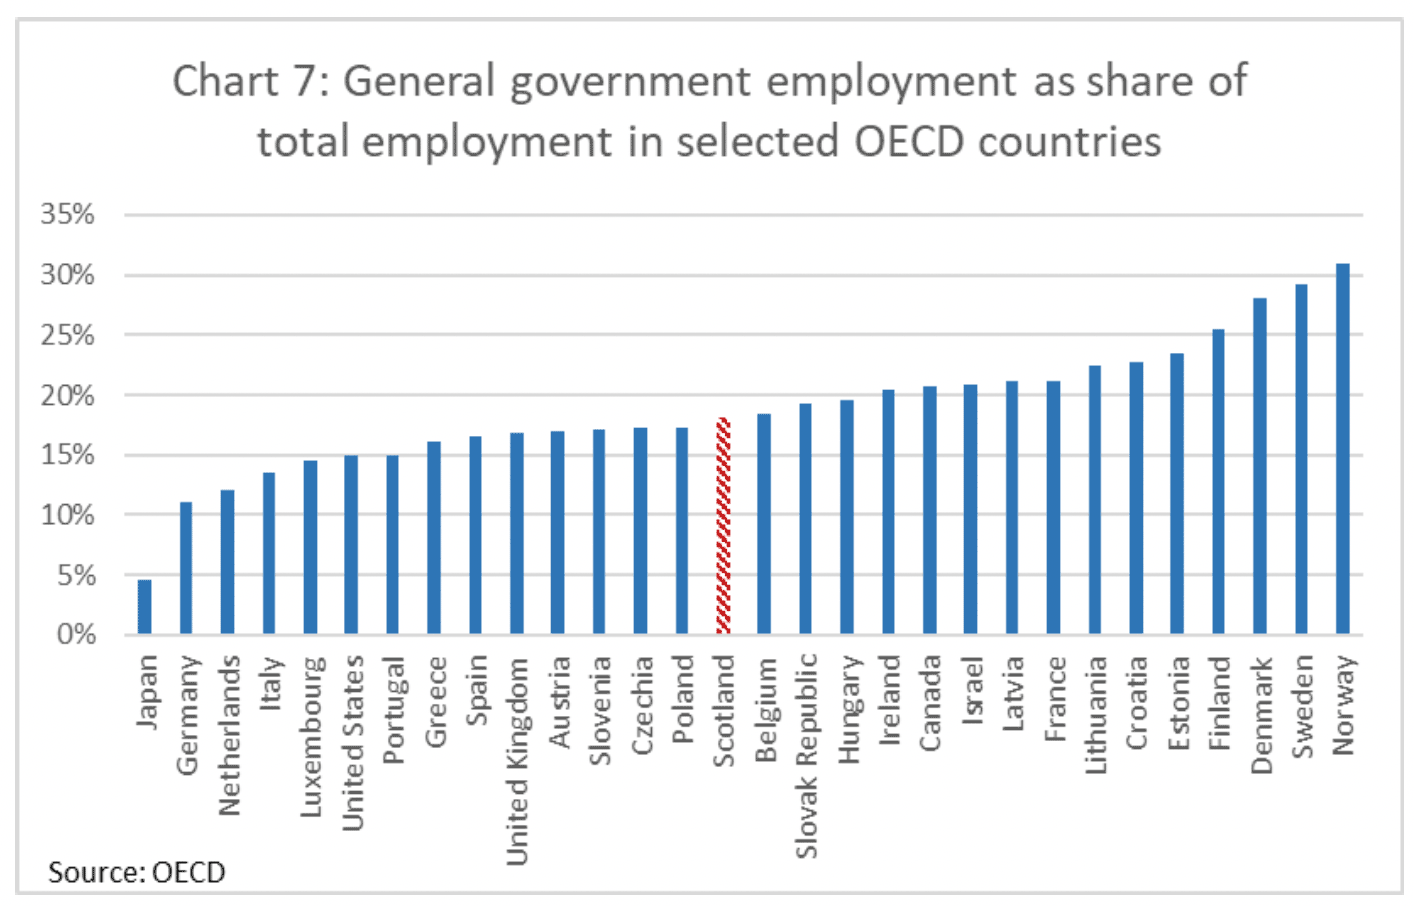 A chart showing general government employment as a share of total employment in selected OECD countries. Scotland is in the middle of the range.